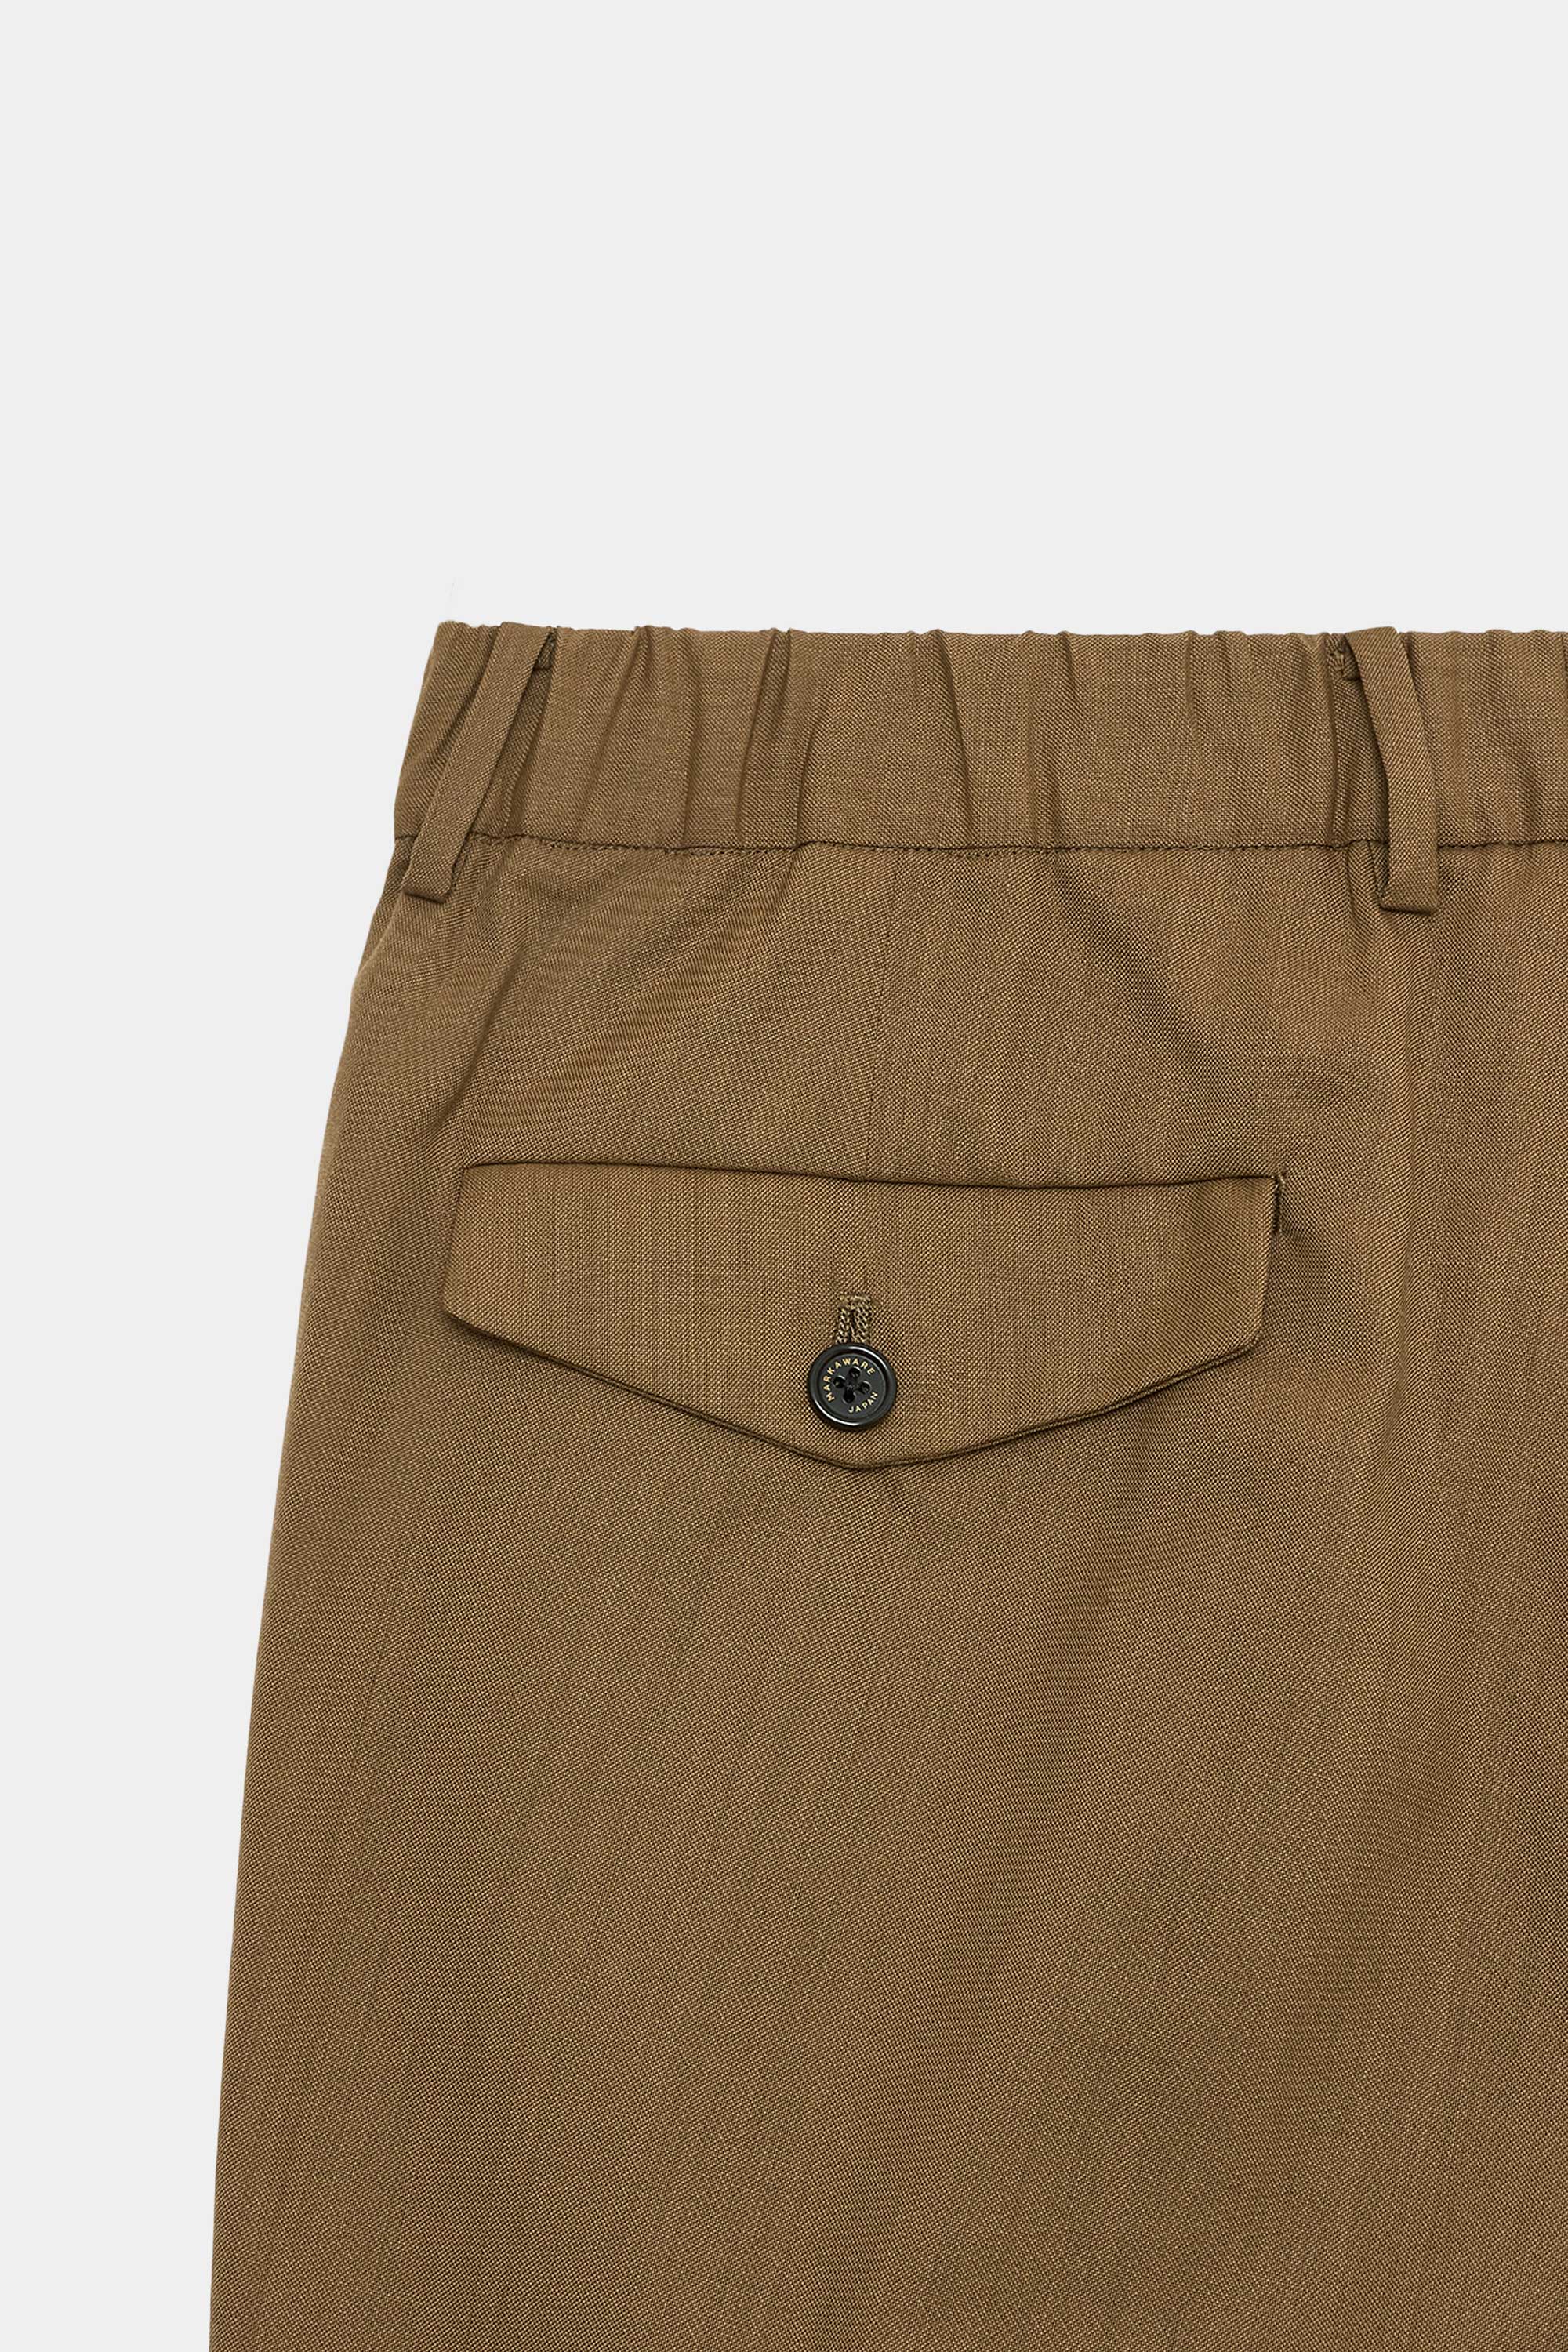 SUPER 120'S WOOL TROPICAL DOUBLE PLEATED CLASSIC WIDE TROUSERS, Khaki